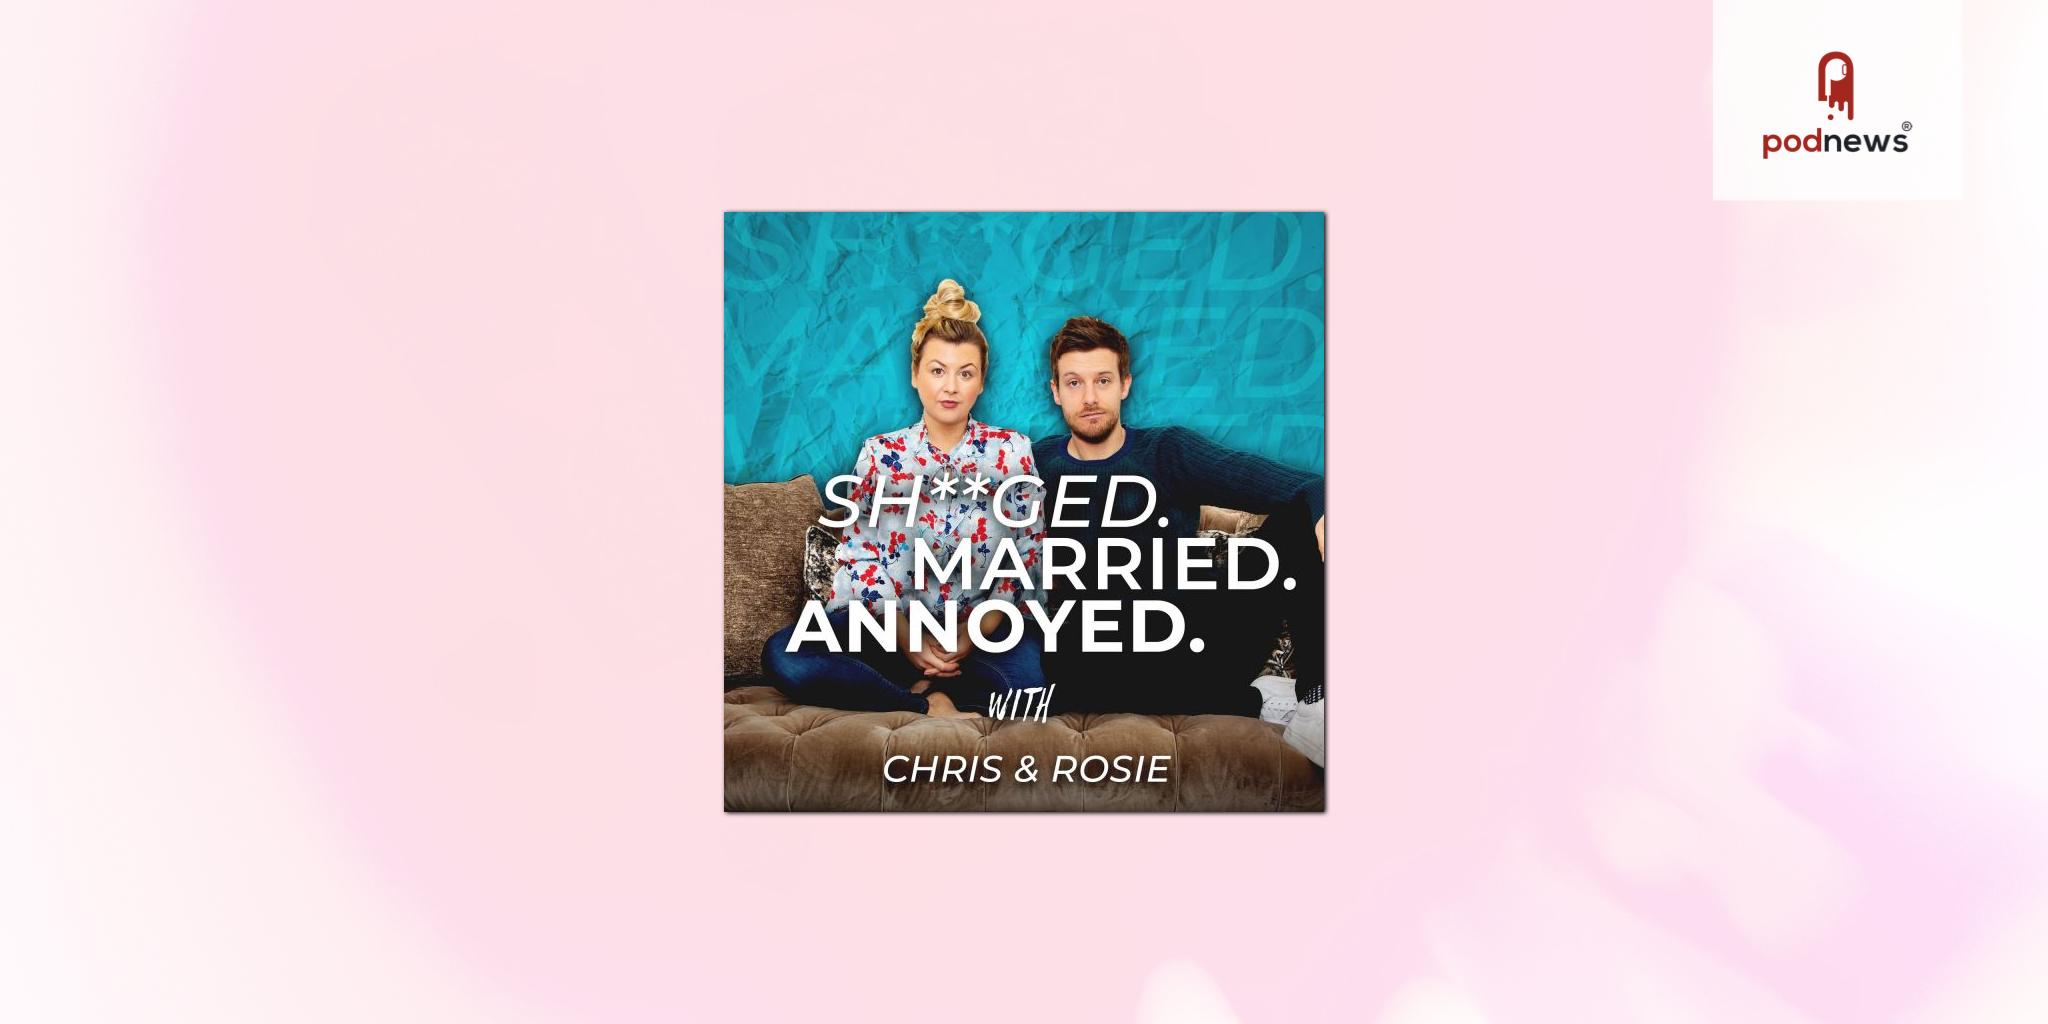 Shagged.Married.Annoyed. launches bonus content and exclusive benefits for fans with Acast+